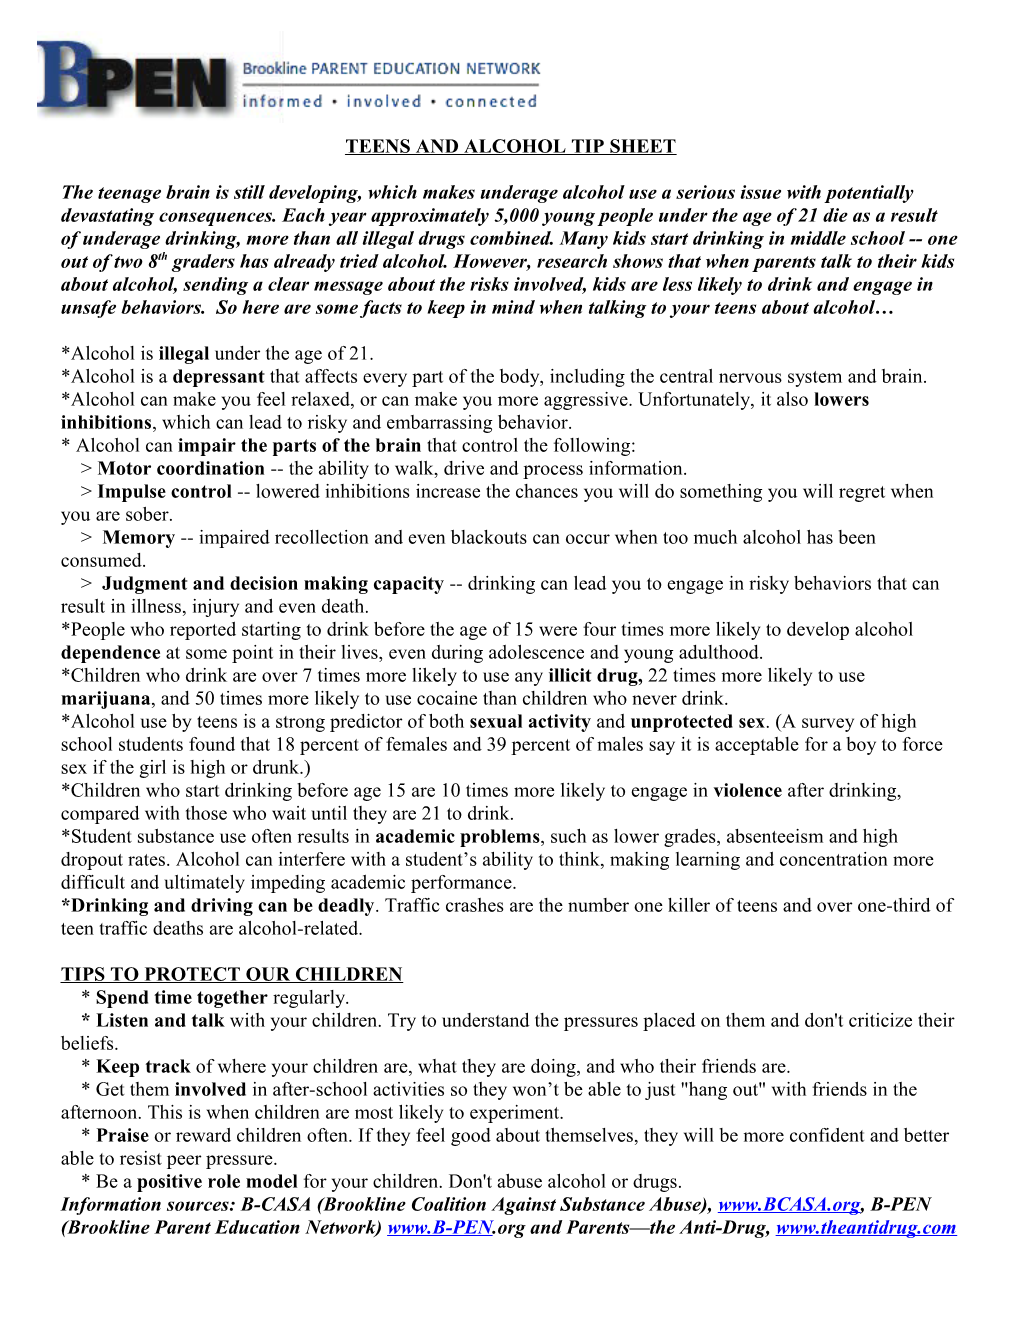 Teens and Alcohol Tip Sheet